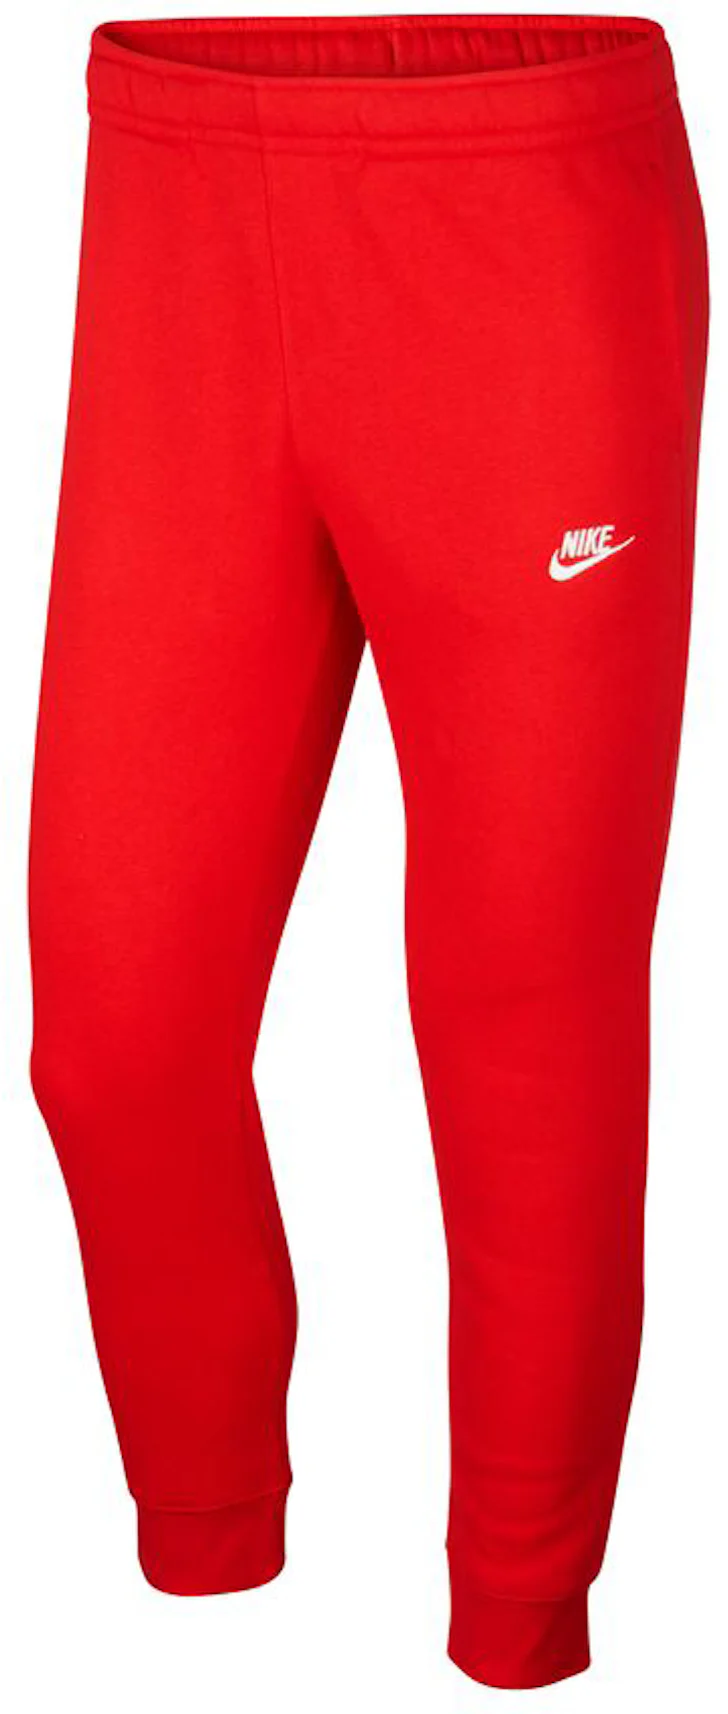 https://images.stockx.com/images/Nike-Sportswear-Club-Fleece-Joggers-University-Red-University-Red-White.jpg?fit=fill&bg=FFFFFF&w=1200&h=857&fm=webp&auto=compress&dpr=2&trim=color&updated_at=1664924709&q=60